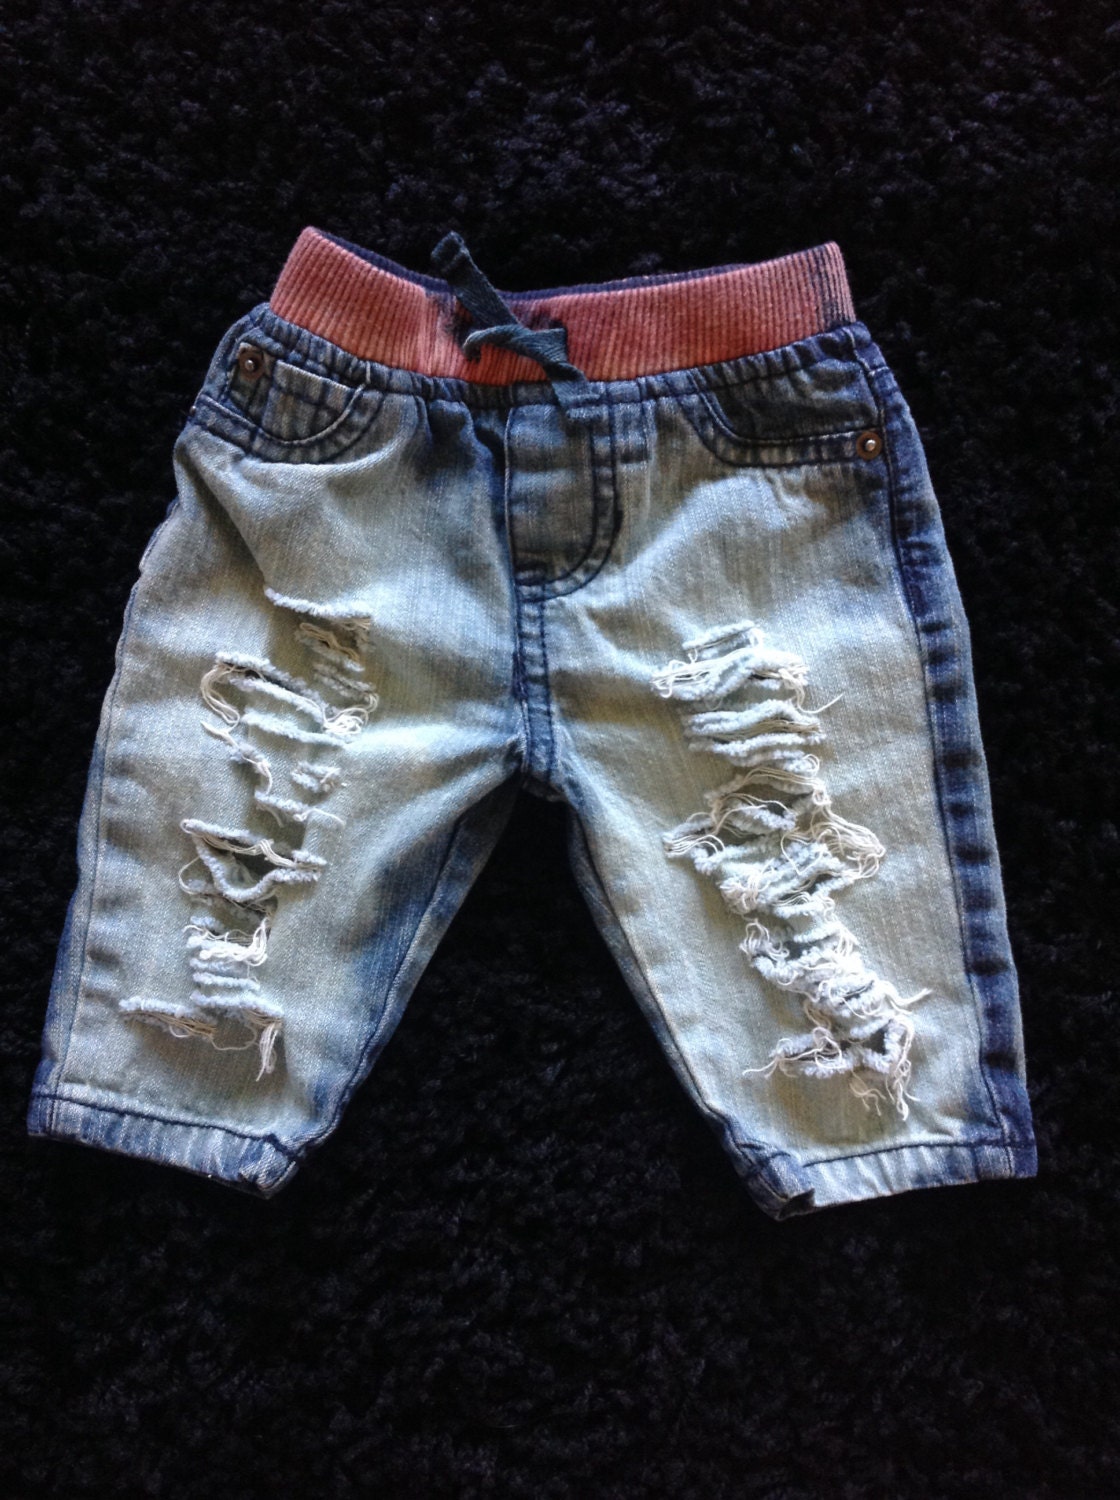 Unisex Baby Jeans by DestroyedBySnow on Etsy